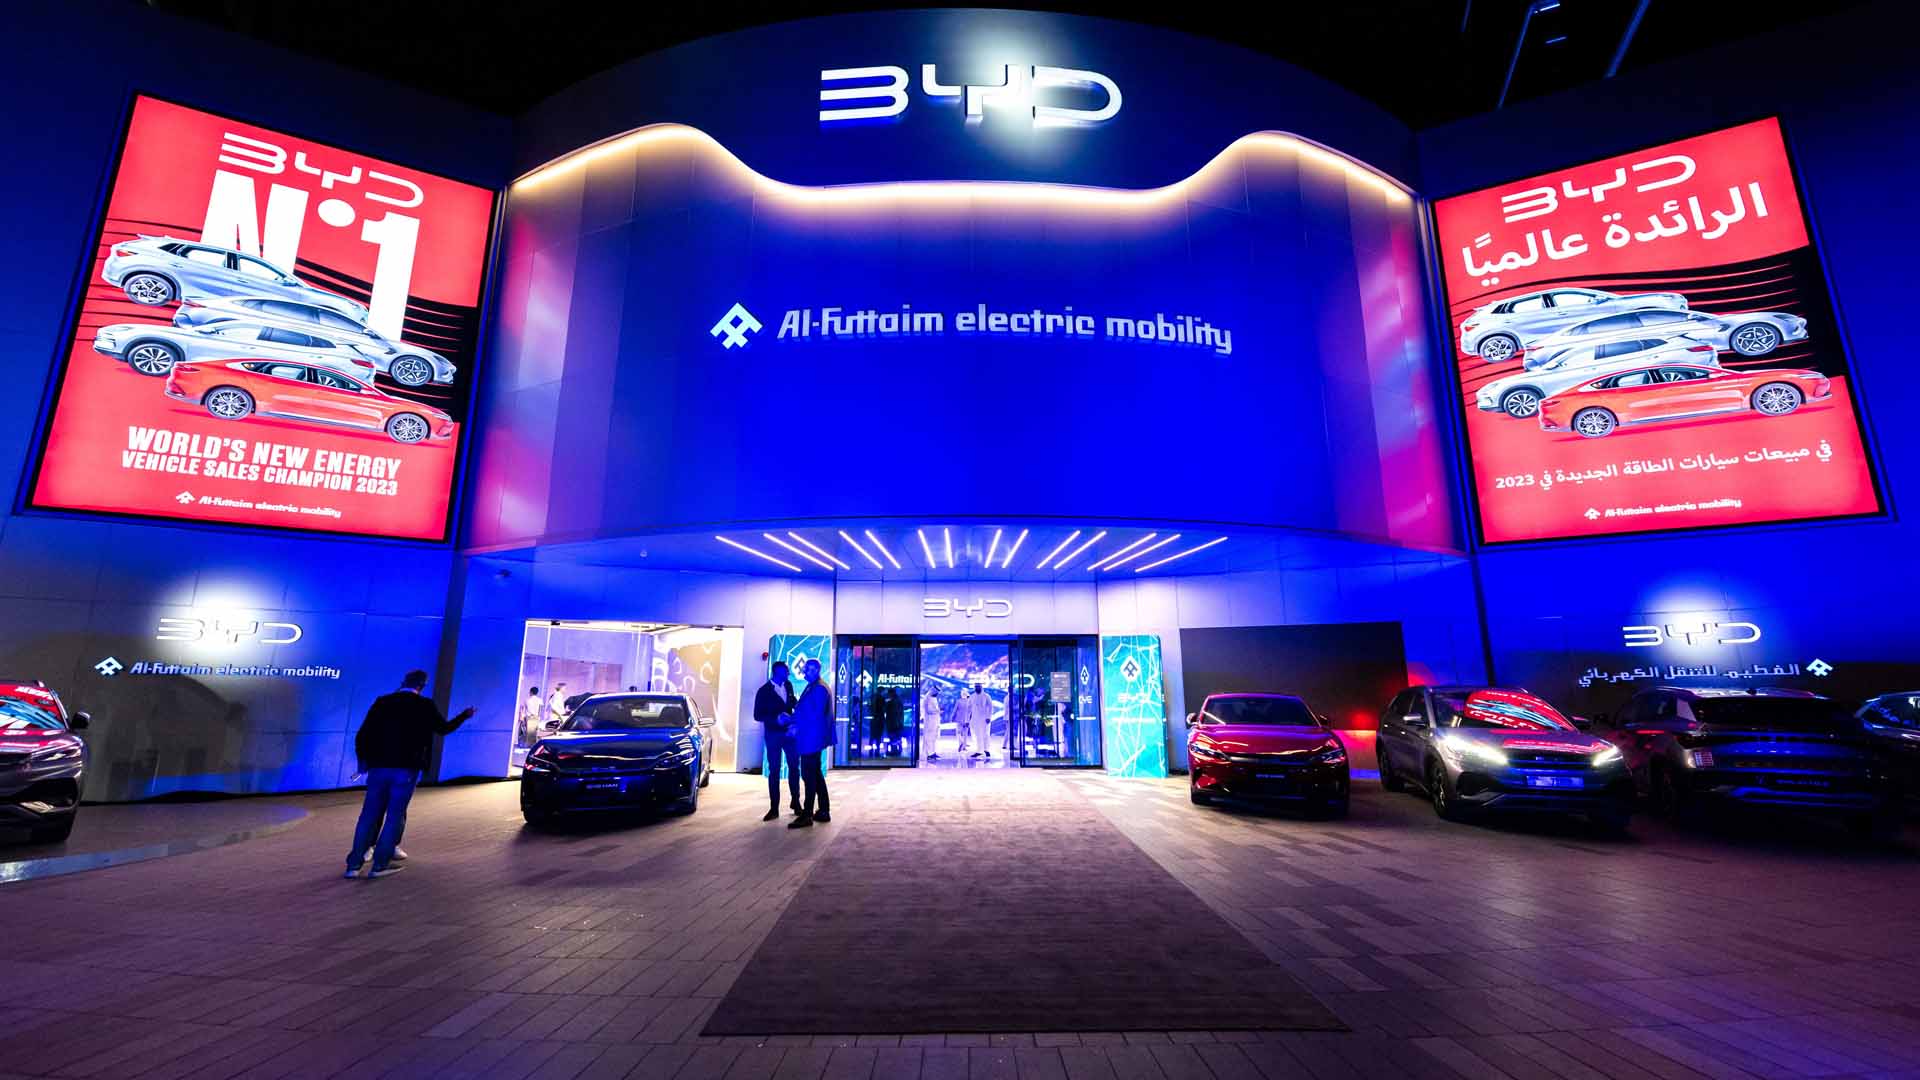 Propelling Sustainable Mobility In The UAE: Al-Futtaim Electric Mobility Launches Three Globally-Acclaimed New BYD Models in the UAE, Including All-Electric and Plug-In Hybrids